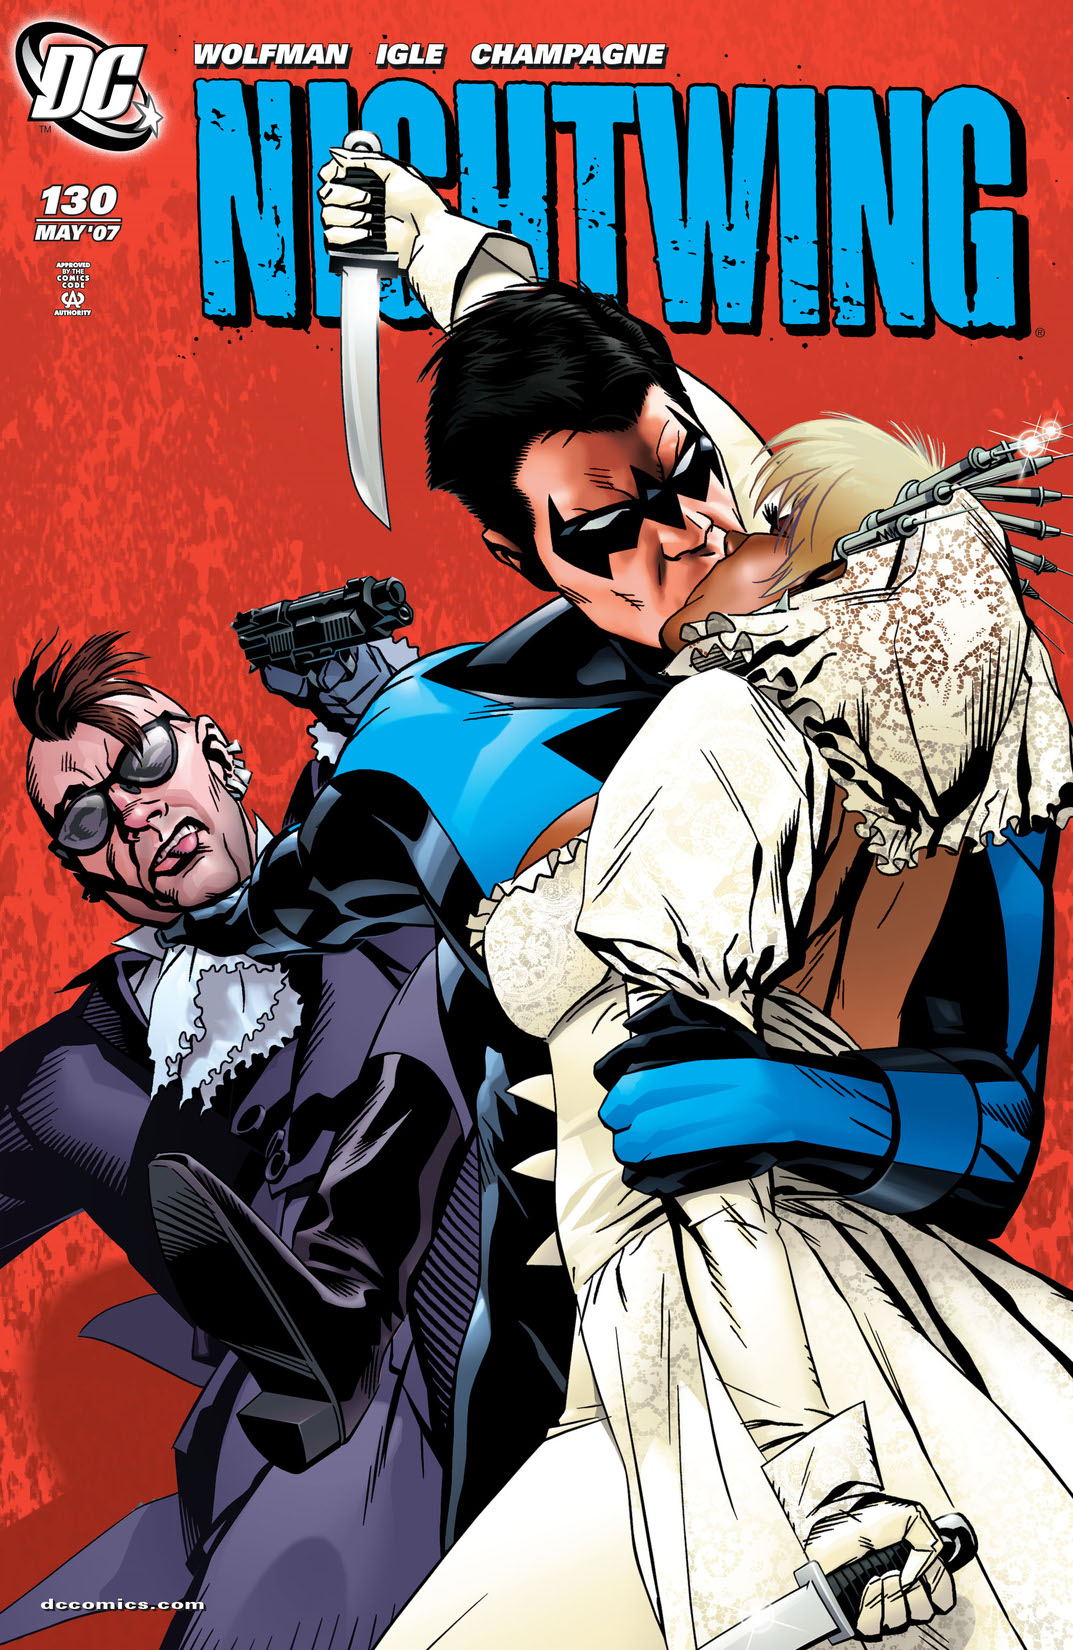 Nightwing (1996-) #130 preview images